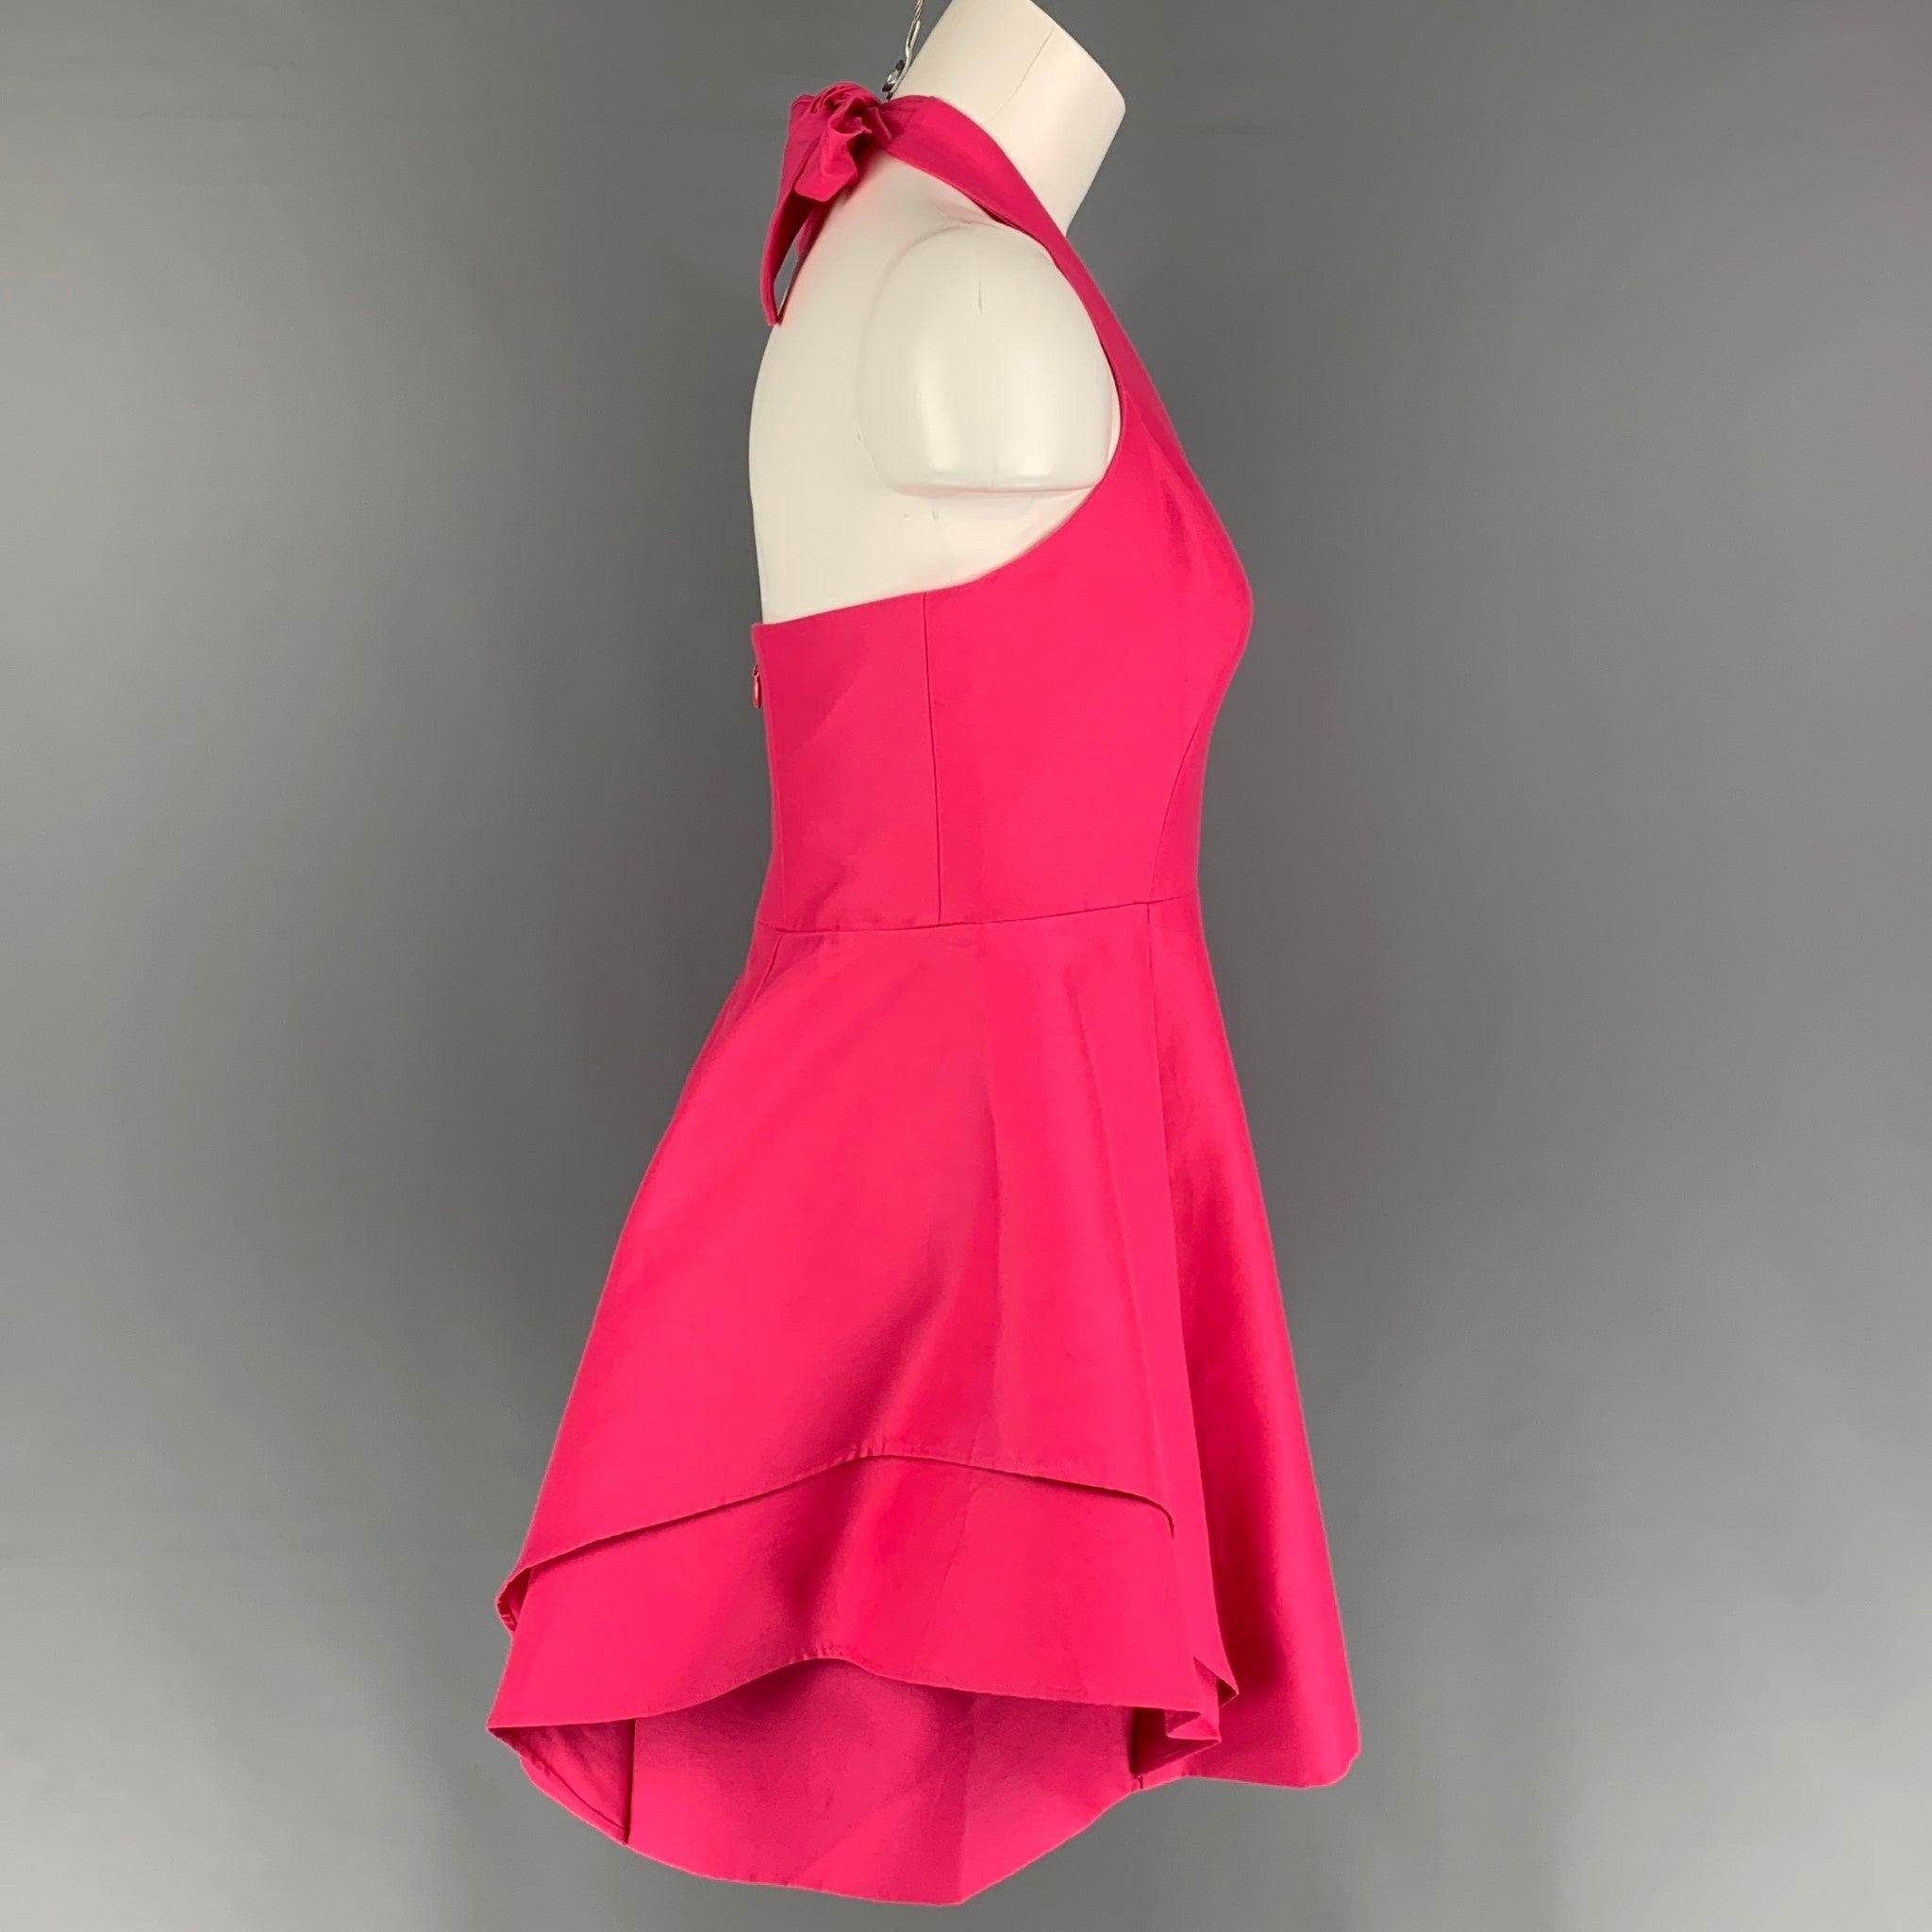 HALSTON HERITAGE dress comes in a pink cotton / silk featuring a pleated style, sleeveless, back zipper, and a top self-tie closure.
Very Good
Pre-Owned Condition. 

Marked:   10 

Measurements: 
  Bust: 30 inches  Waist: 30 inches  Hip: 40 inches 